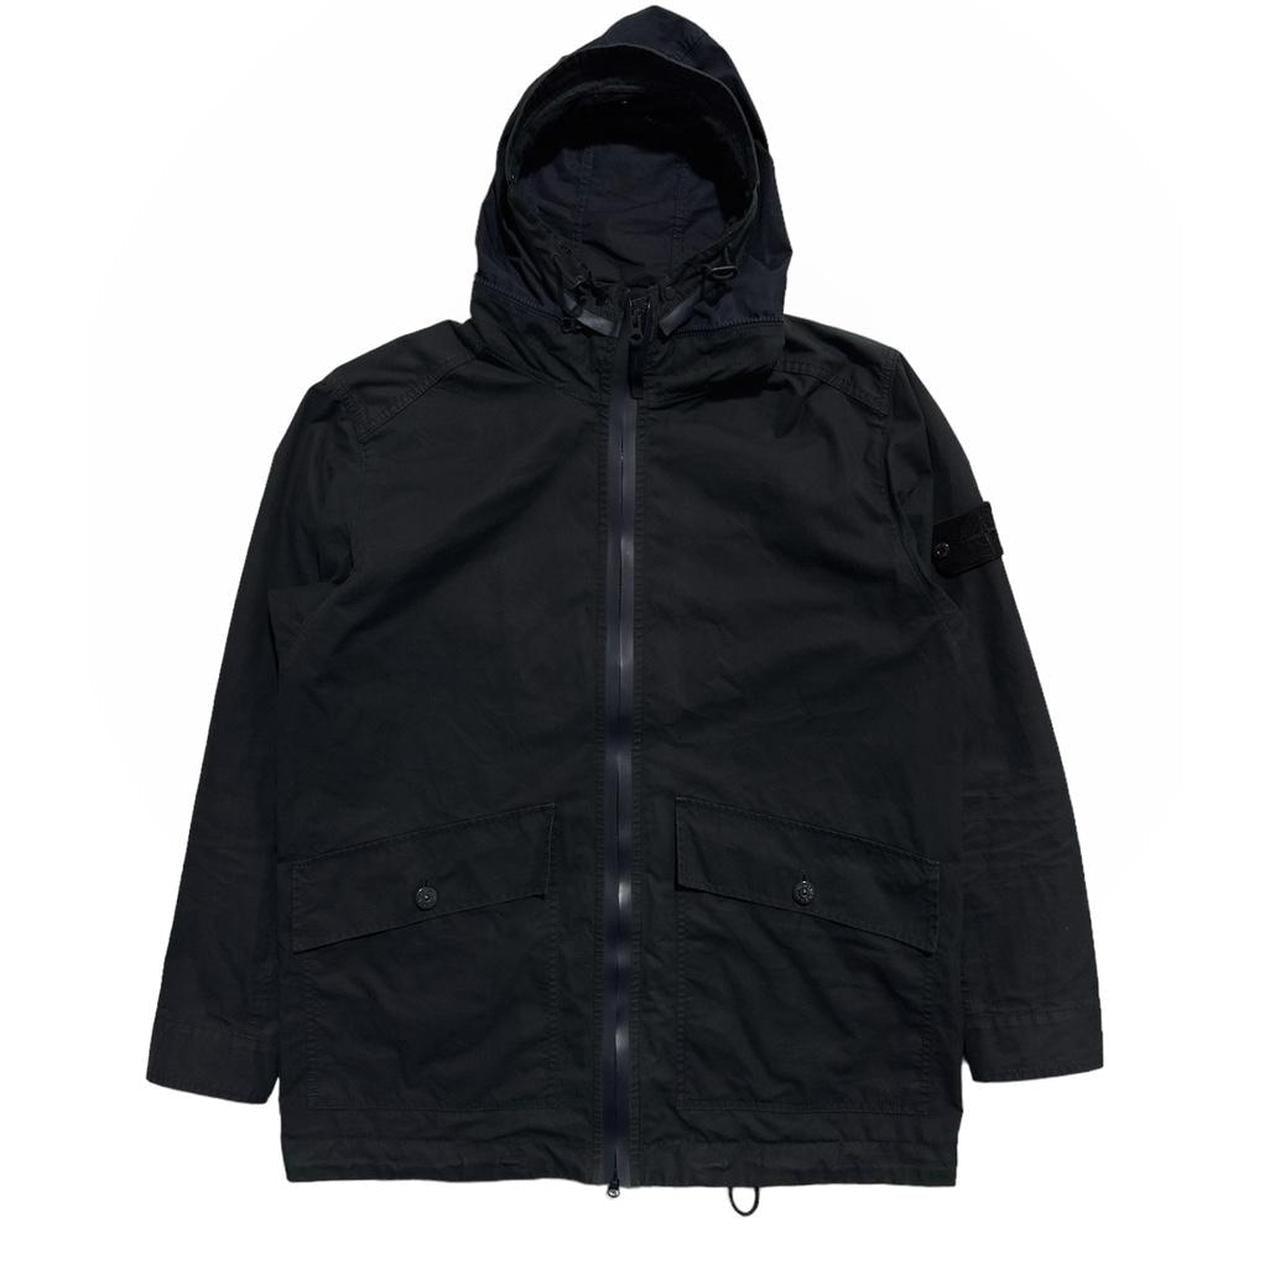 Stone Island Ghost Trench Jacket - Known Source